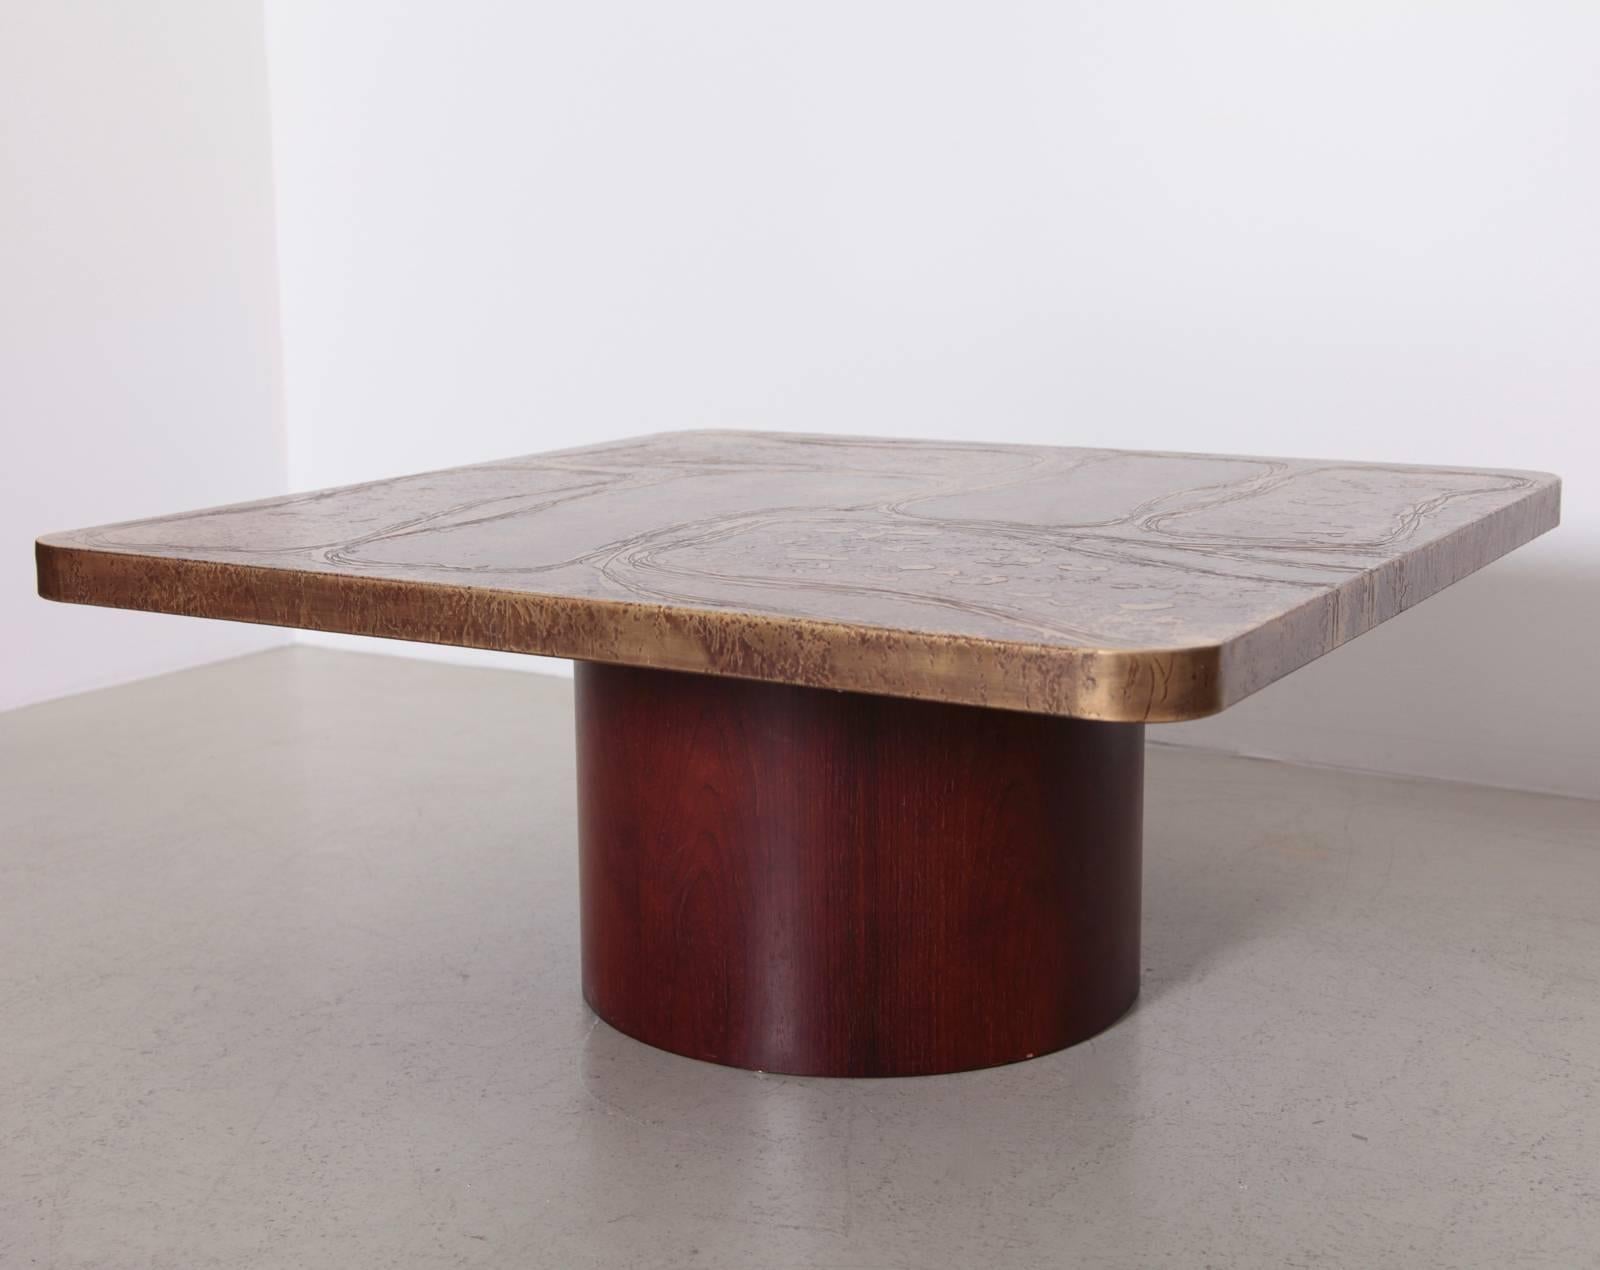 Very rare coffee table with a etched brass tabletop on a wooden  plywood base by the German designer Heinz Lilienthal. The table is in excellent condition.

